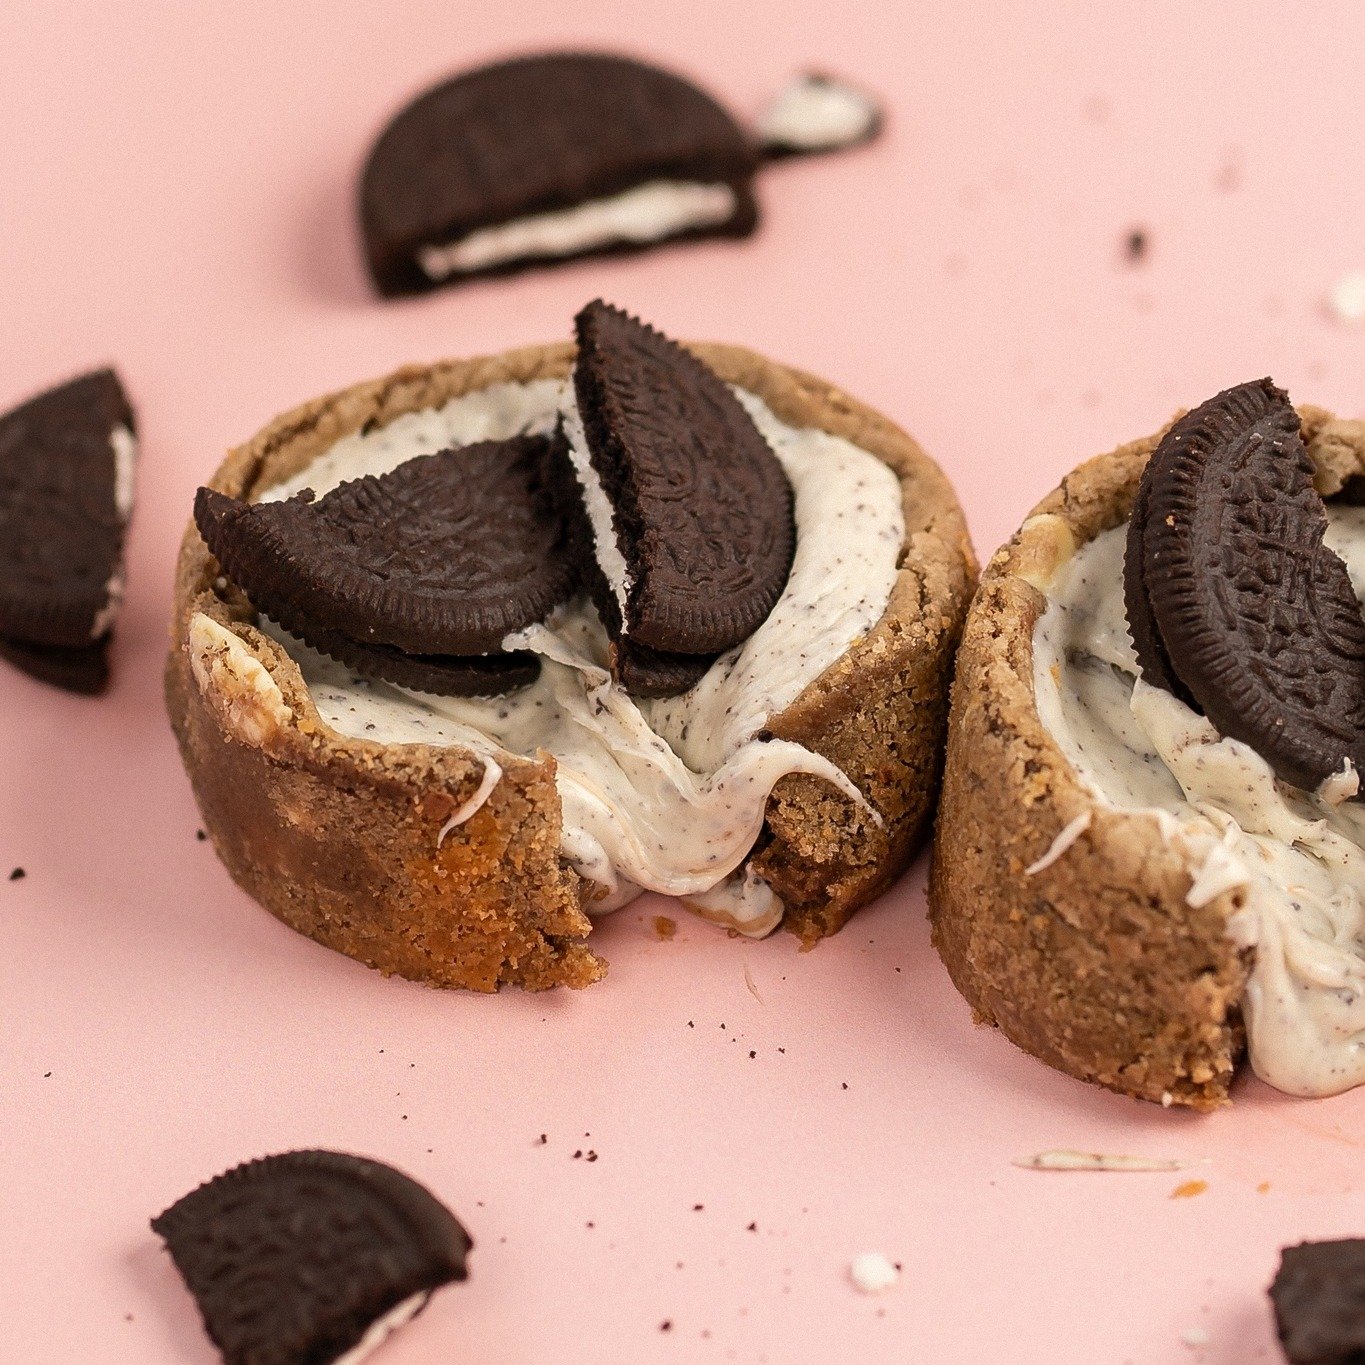 Indulge in our Cookies and Cream Deep Dish &ndash; a decadent delight featuring creamy Oreo filling and topped with even more Oreo goodness and crumbly perfection! 🍪💫 Treat yourself to a taste of cookie heaven today! #CookiesAndCream #OreoLove #SOS